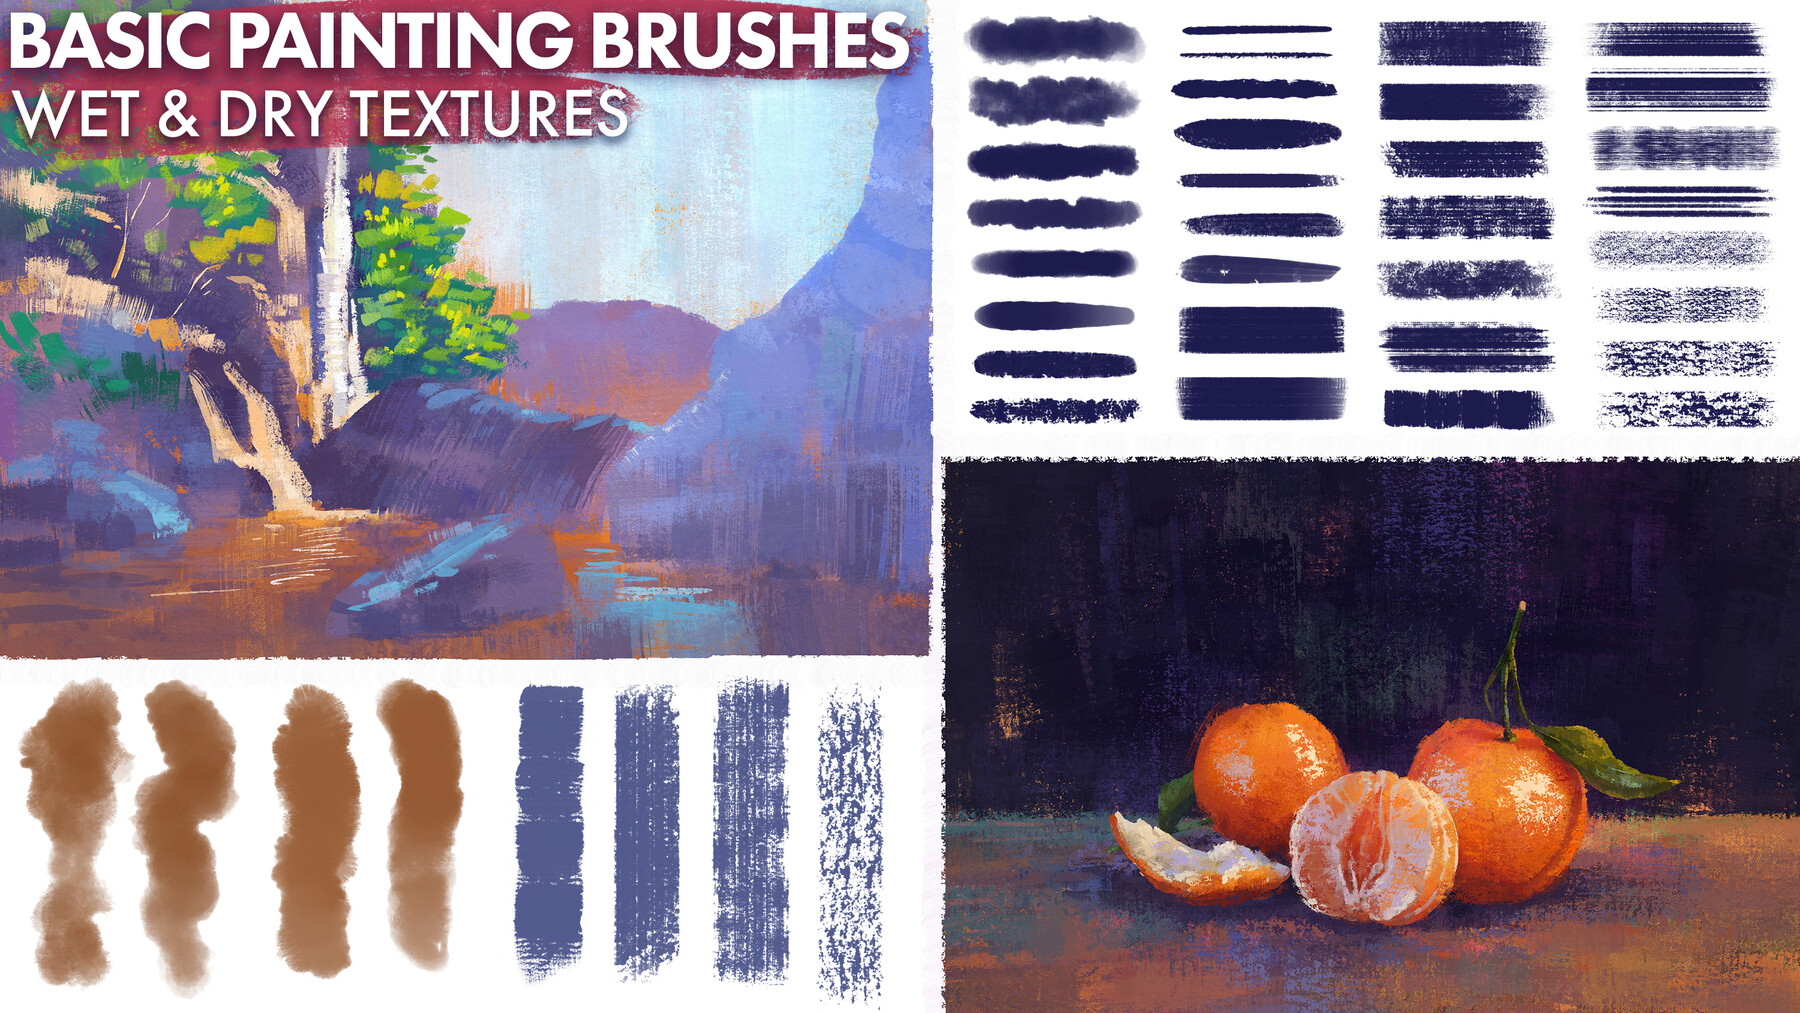 ArtStation - Hand-painted Gouache Brushes for Photoshop and Procreate